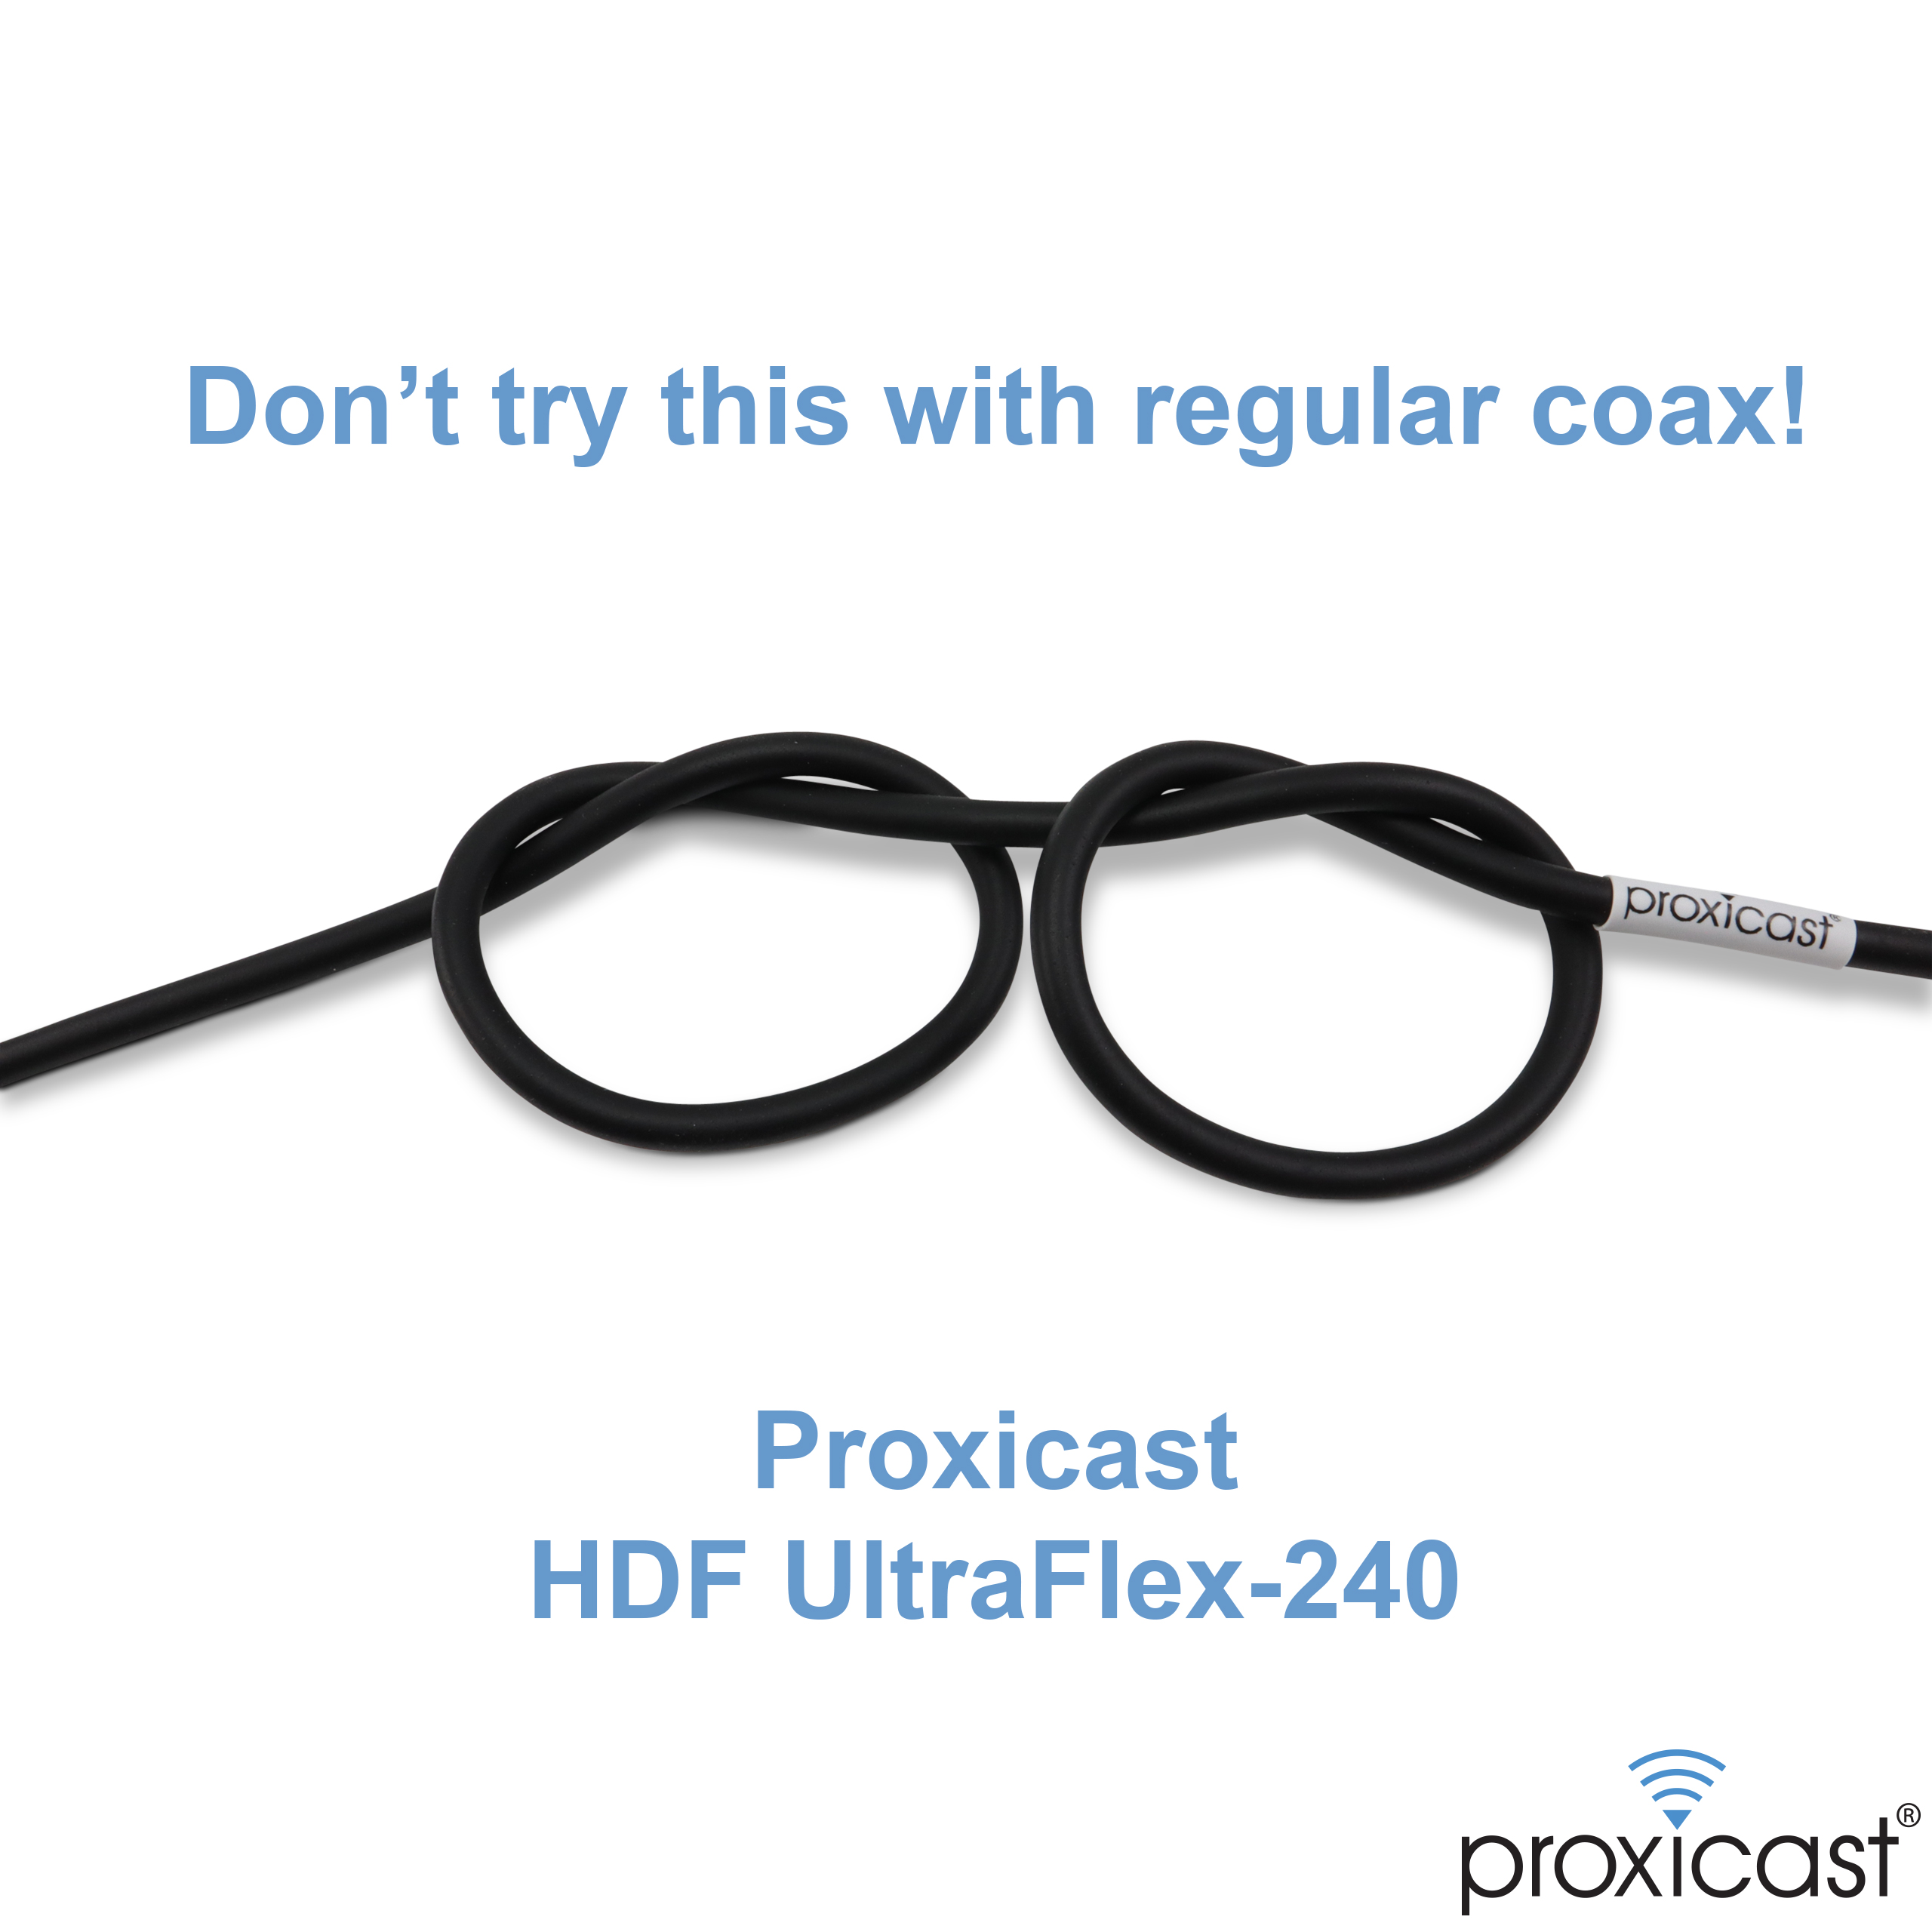 Proxicast Ultra Flexible SMA Male SMA Female Low Loss 50 Ohm Coax Jumper Cable/Antenna Lead Extender for 3G/4G/LTE/Ham/ADS-B/GPS/RF Radio Use - 2 ft Not for TV or WiFi 